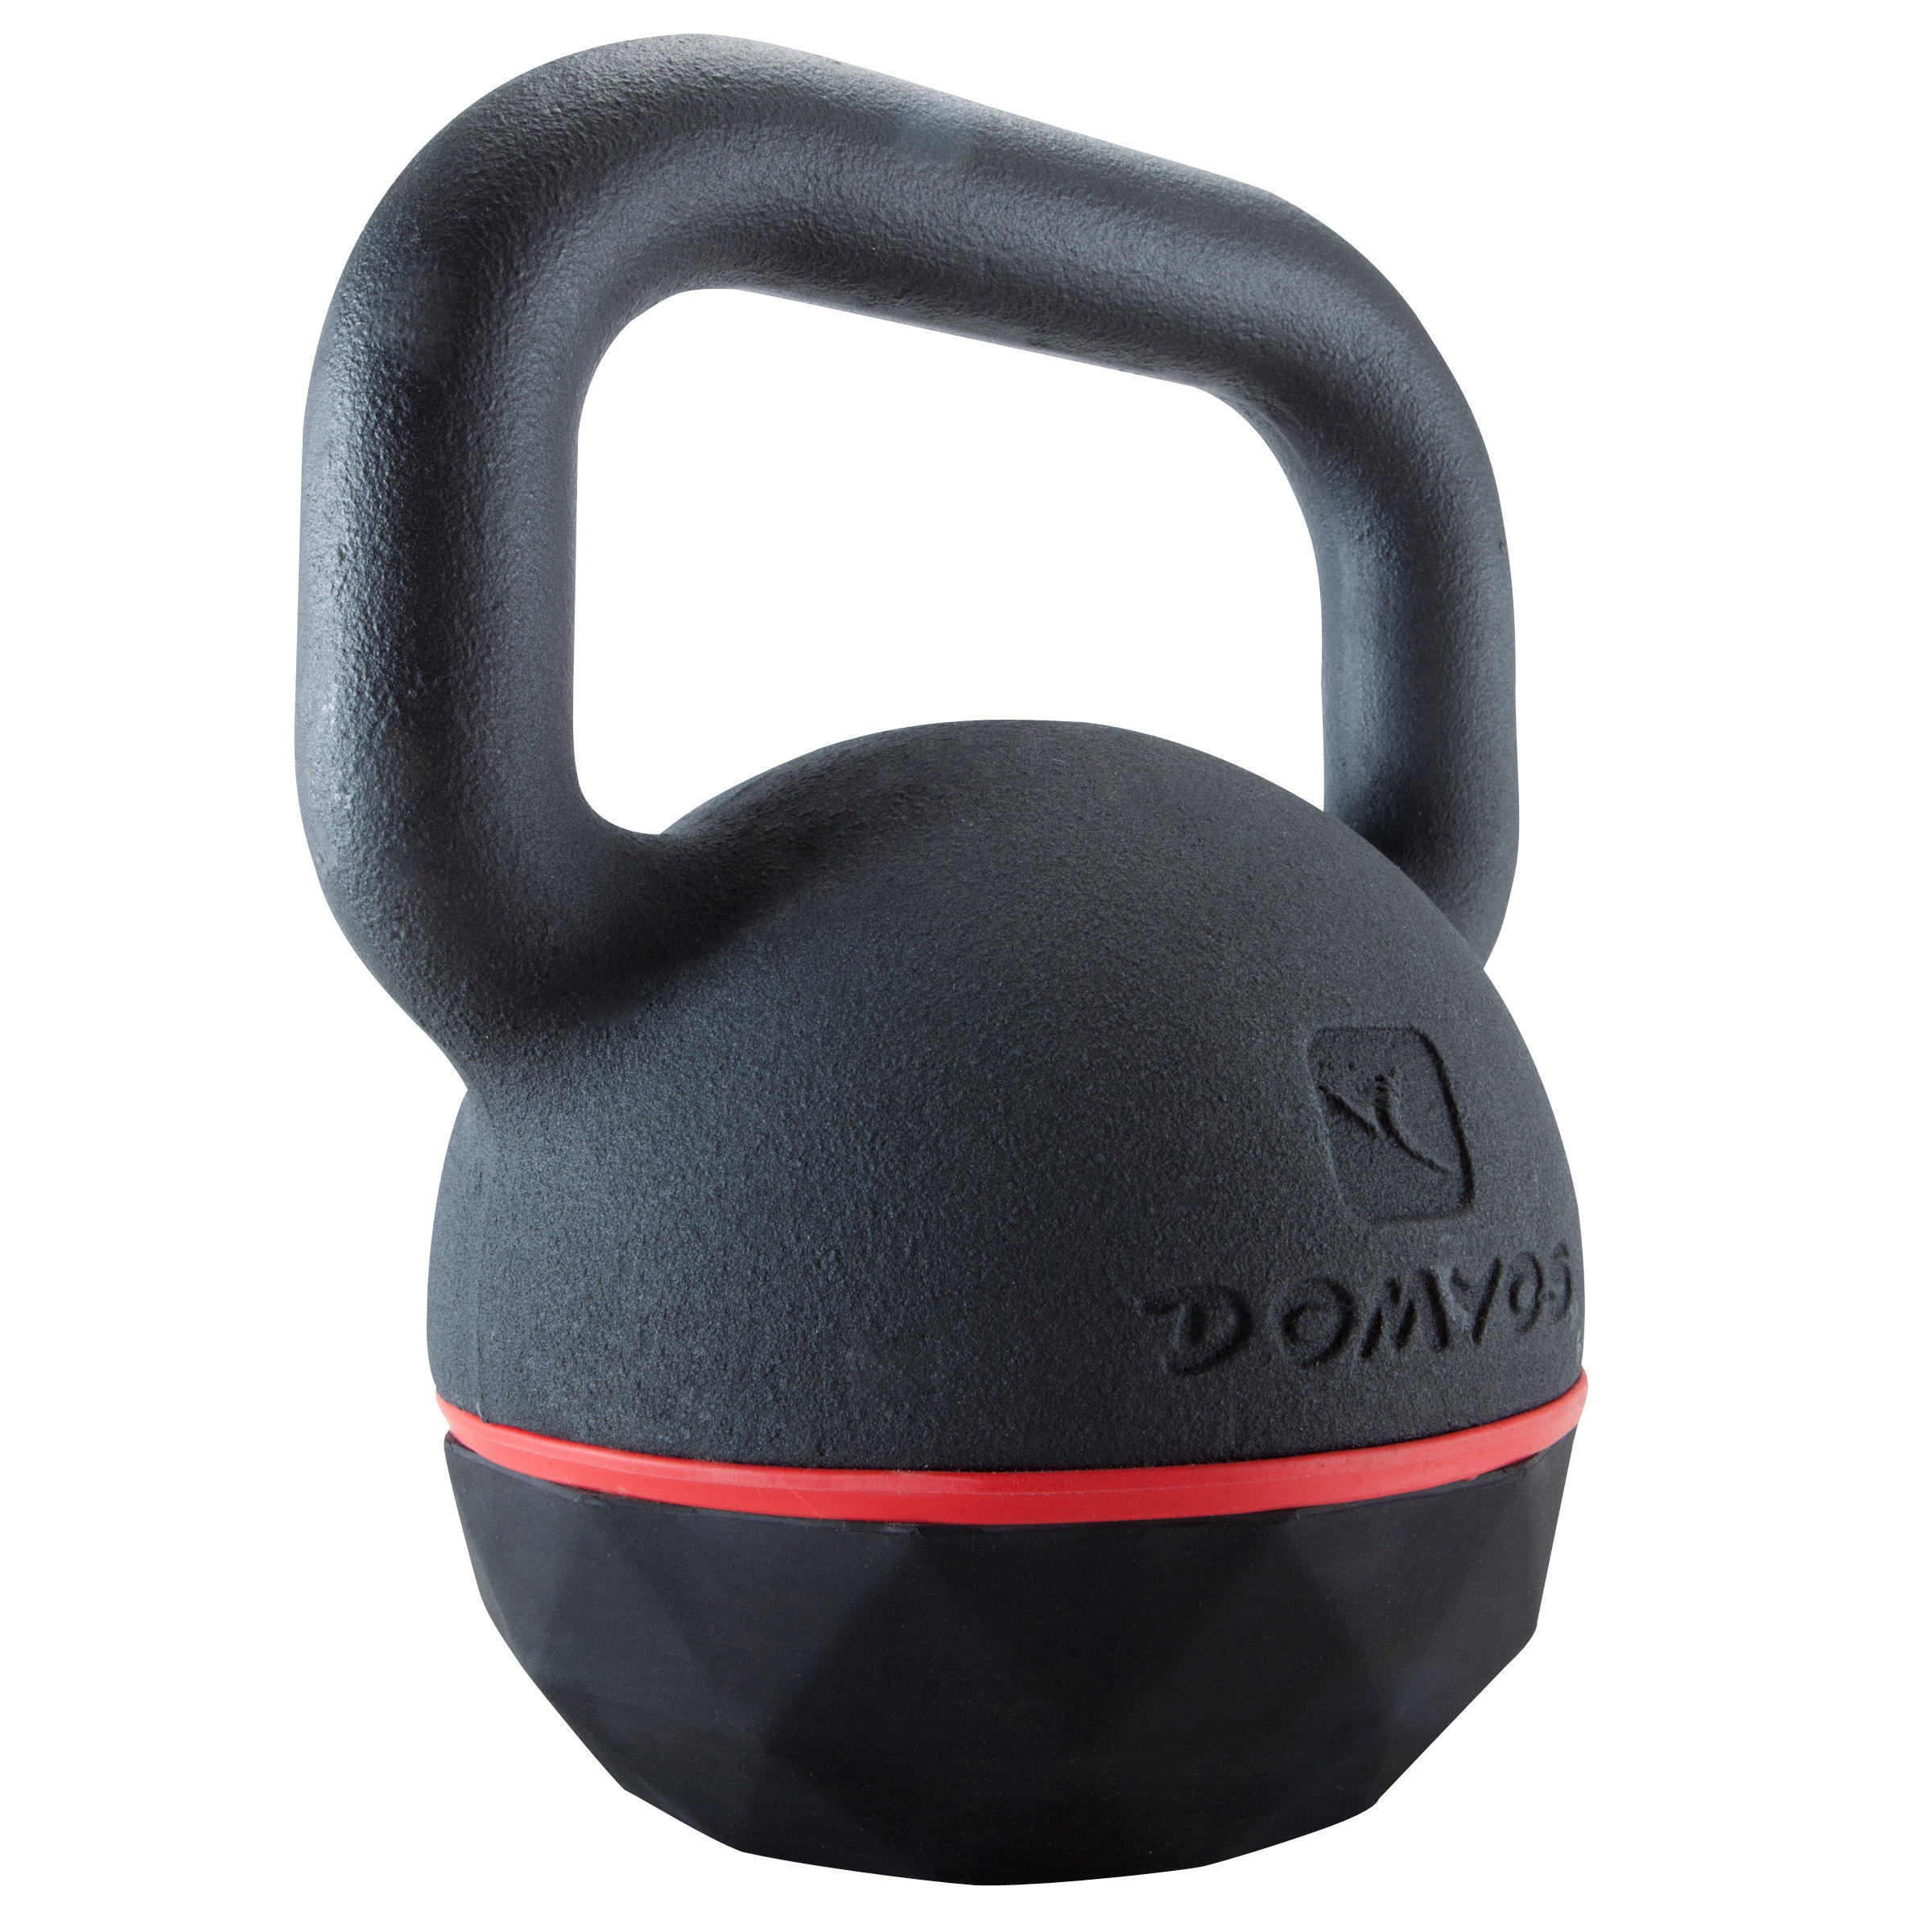 Cast Iron Kettlebell with Rubber Base - 20 kg 3/9